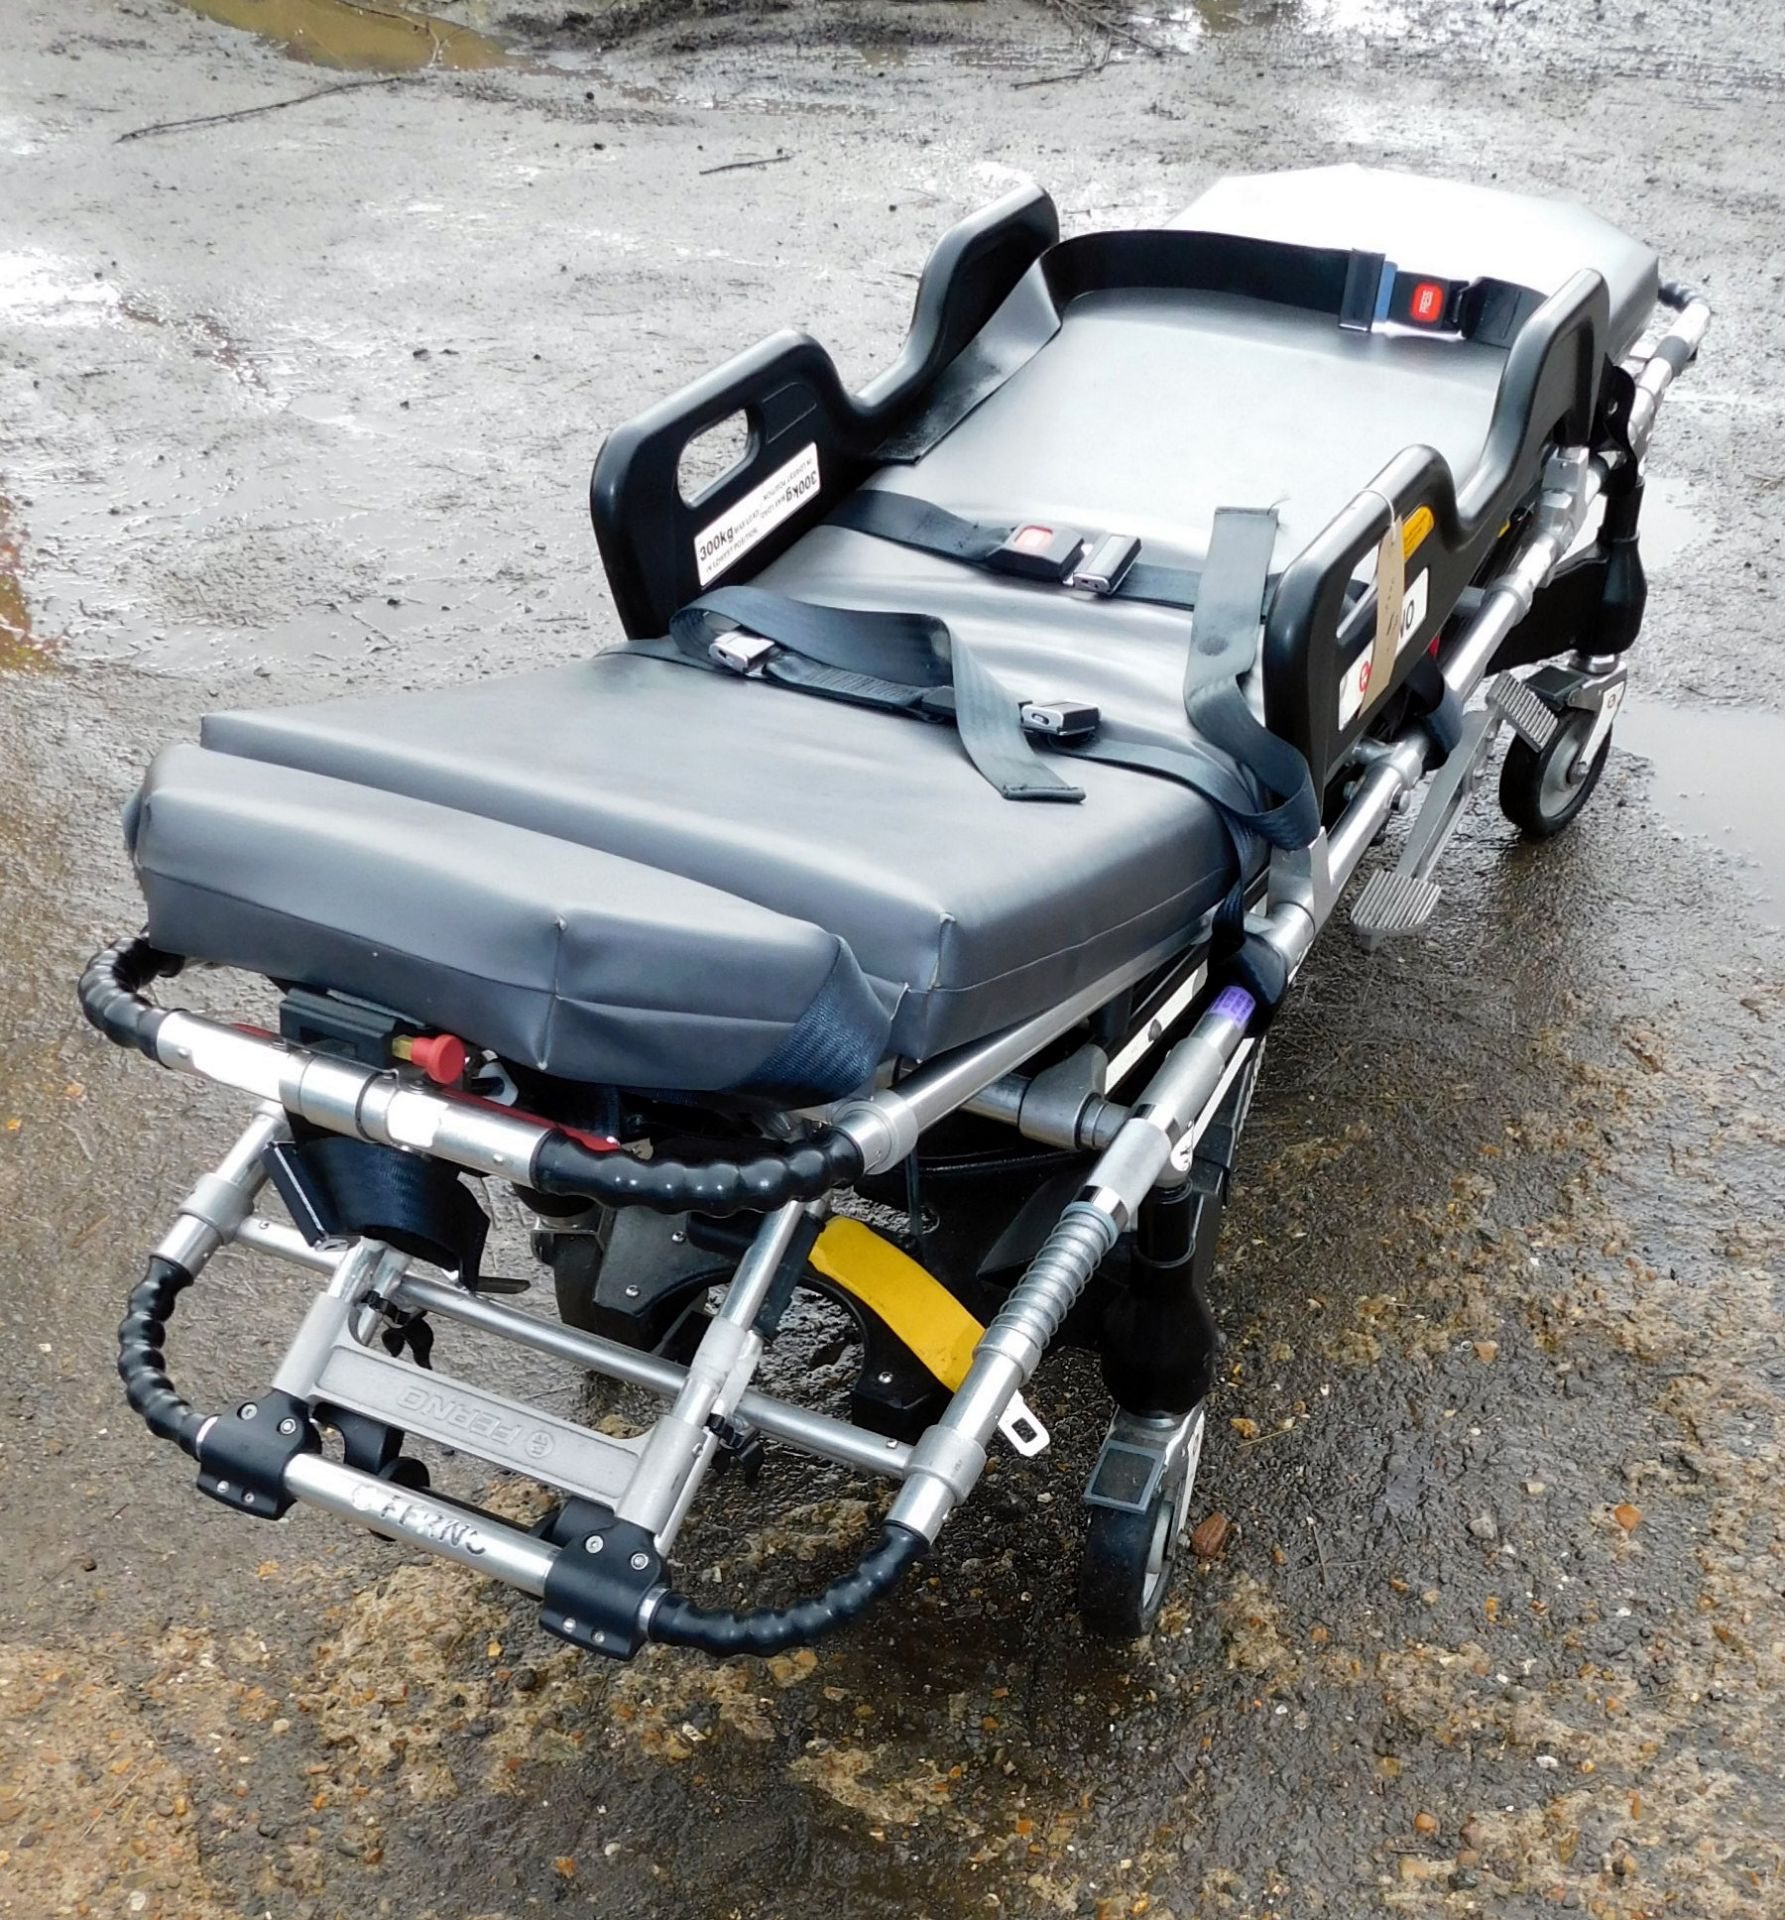 Ferno Pegasus Stretcher, s/n PEG5517 (2013), Lift Count 3095 (Stored on Lot 38) (Located South - Image 3 of 5